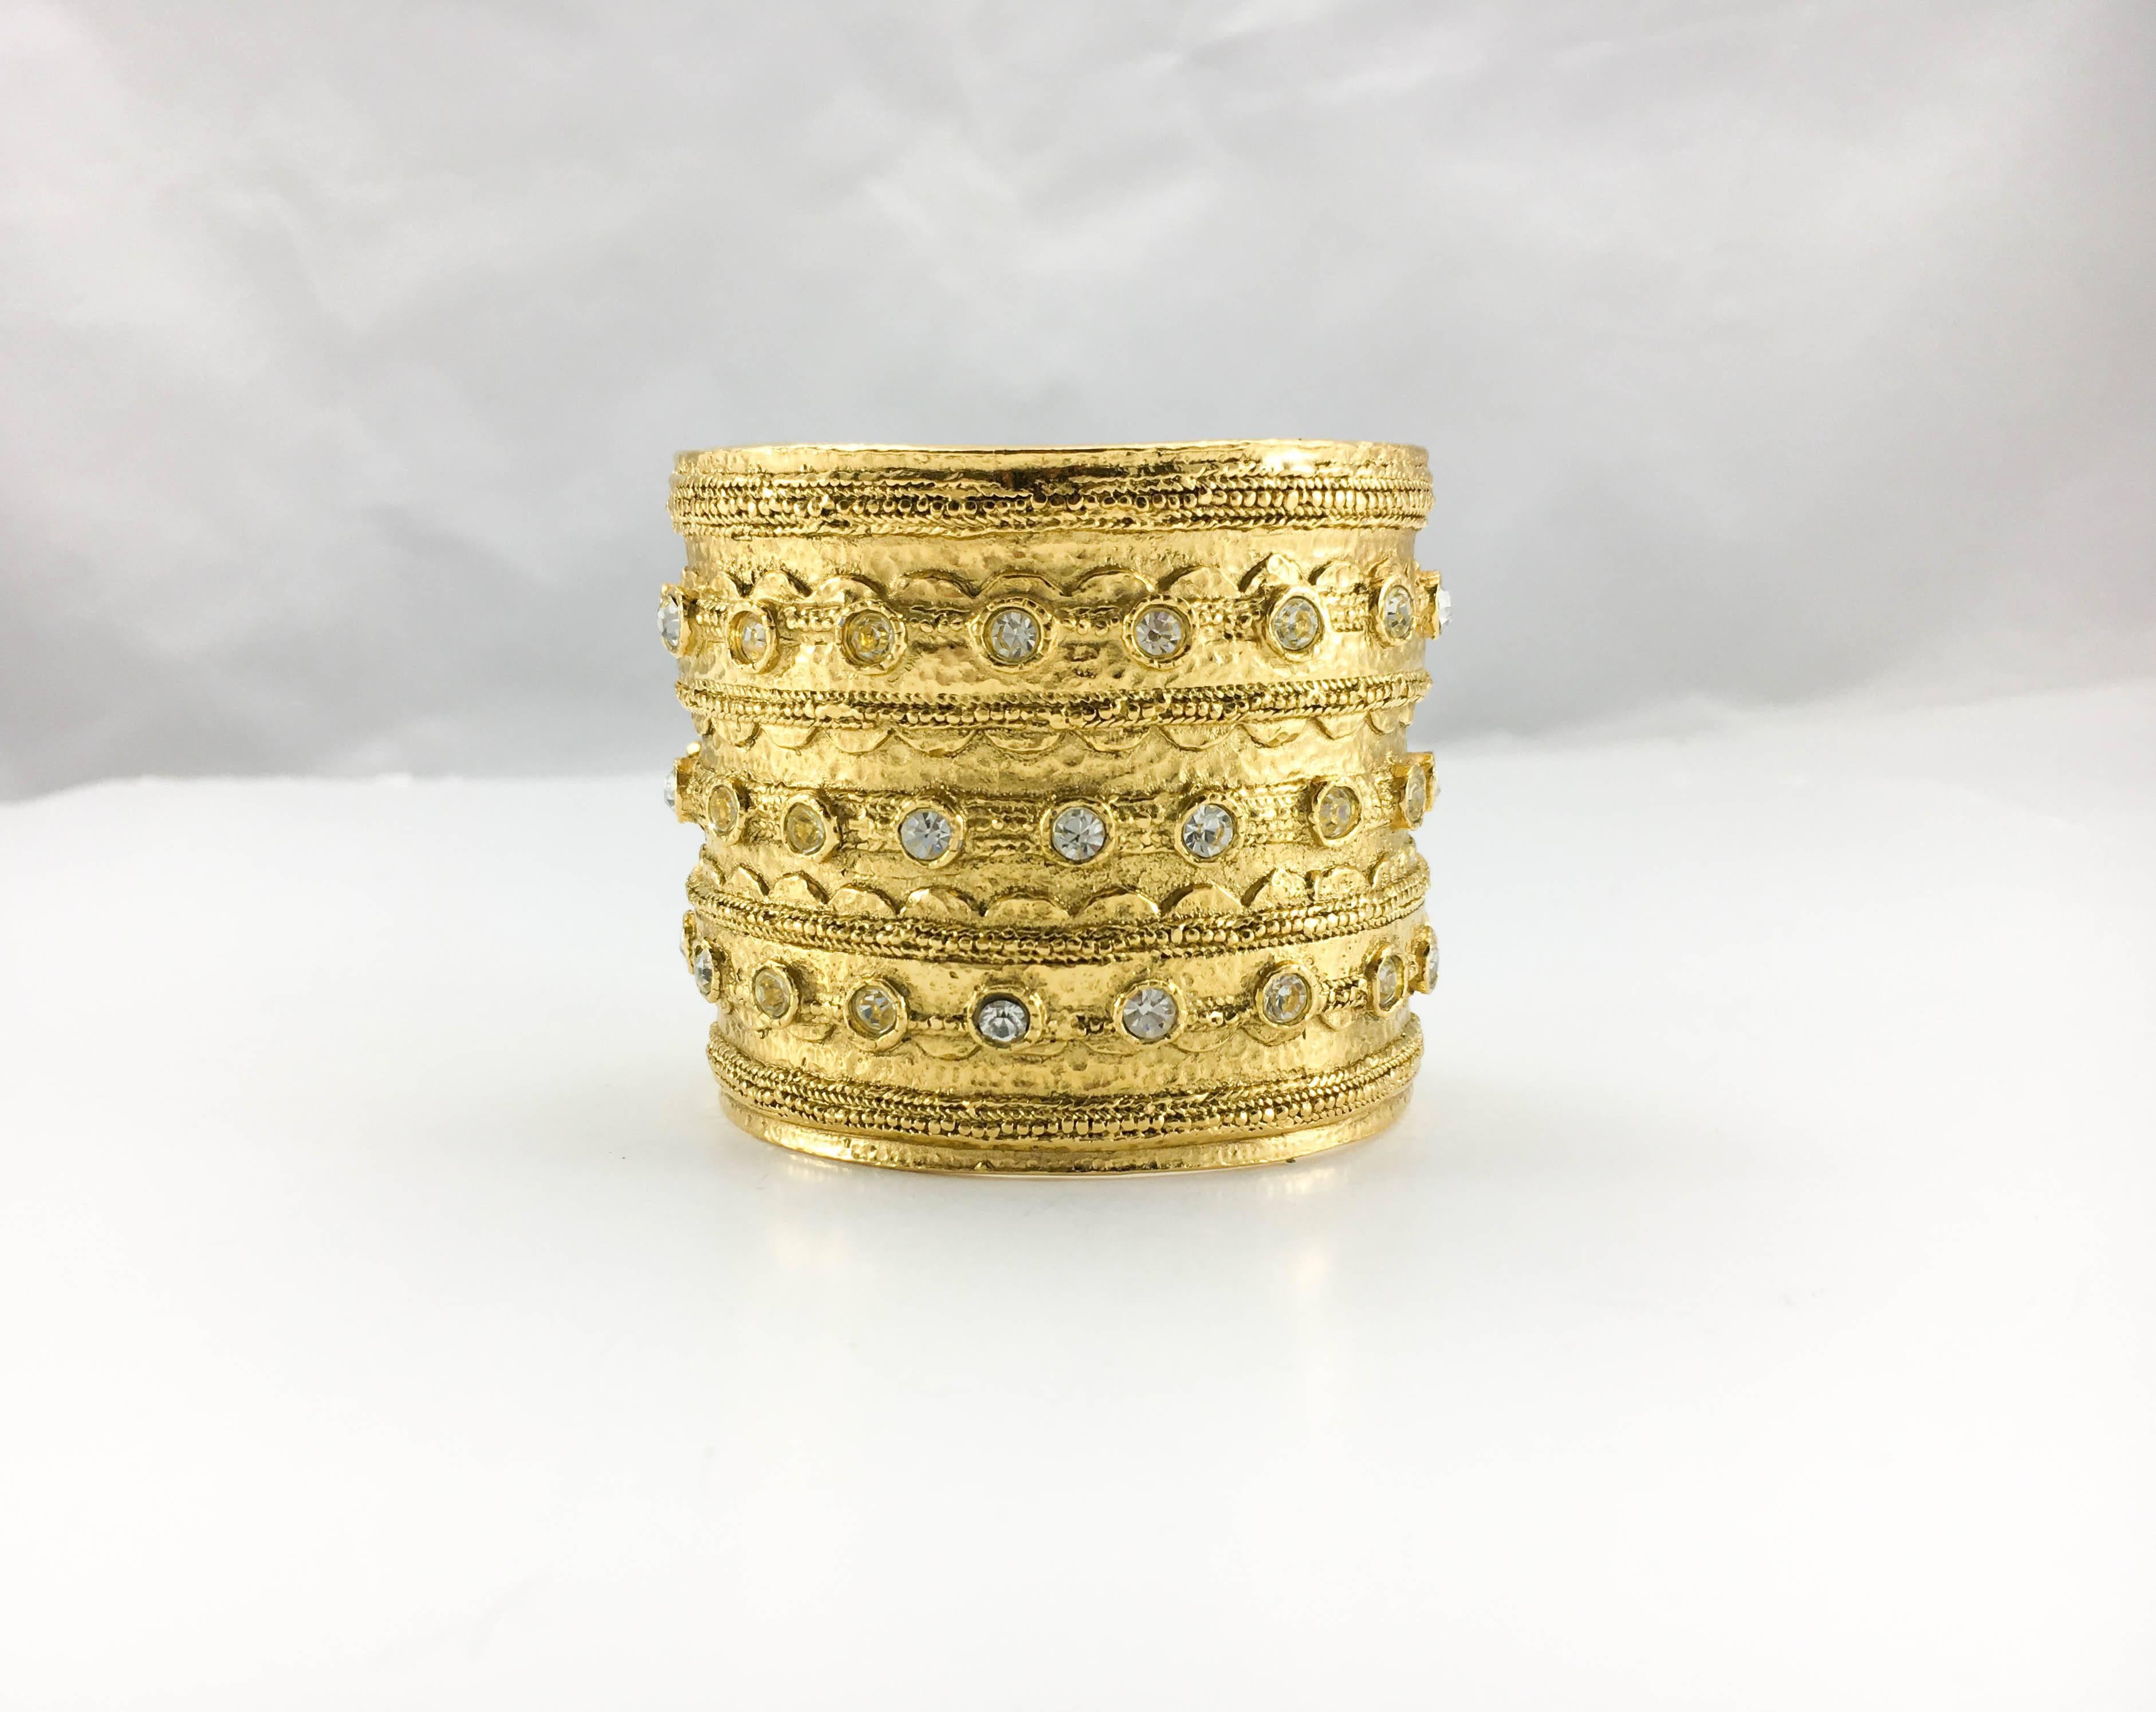 Etruscan Revival 1980's Chanel 'Etruscan' Rhinestone Embellished Gold-Plated Cuff Bracelet For Sale